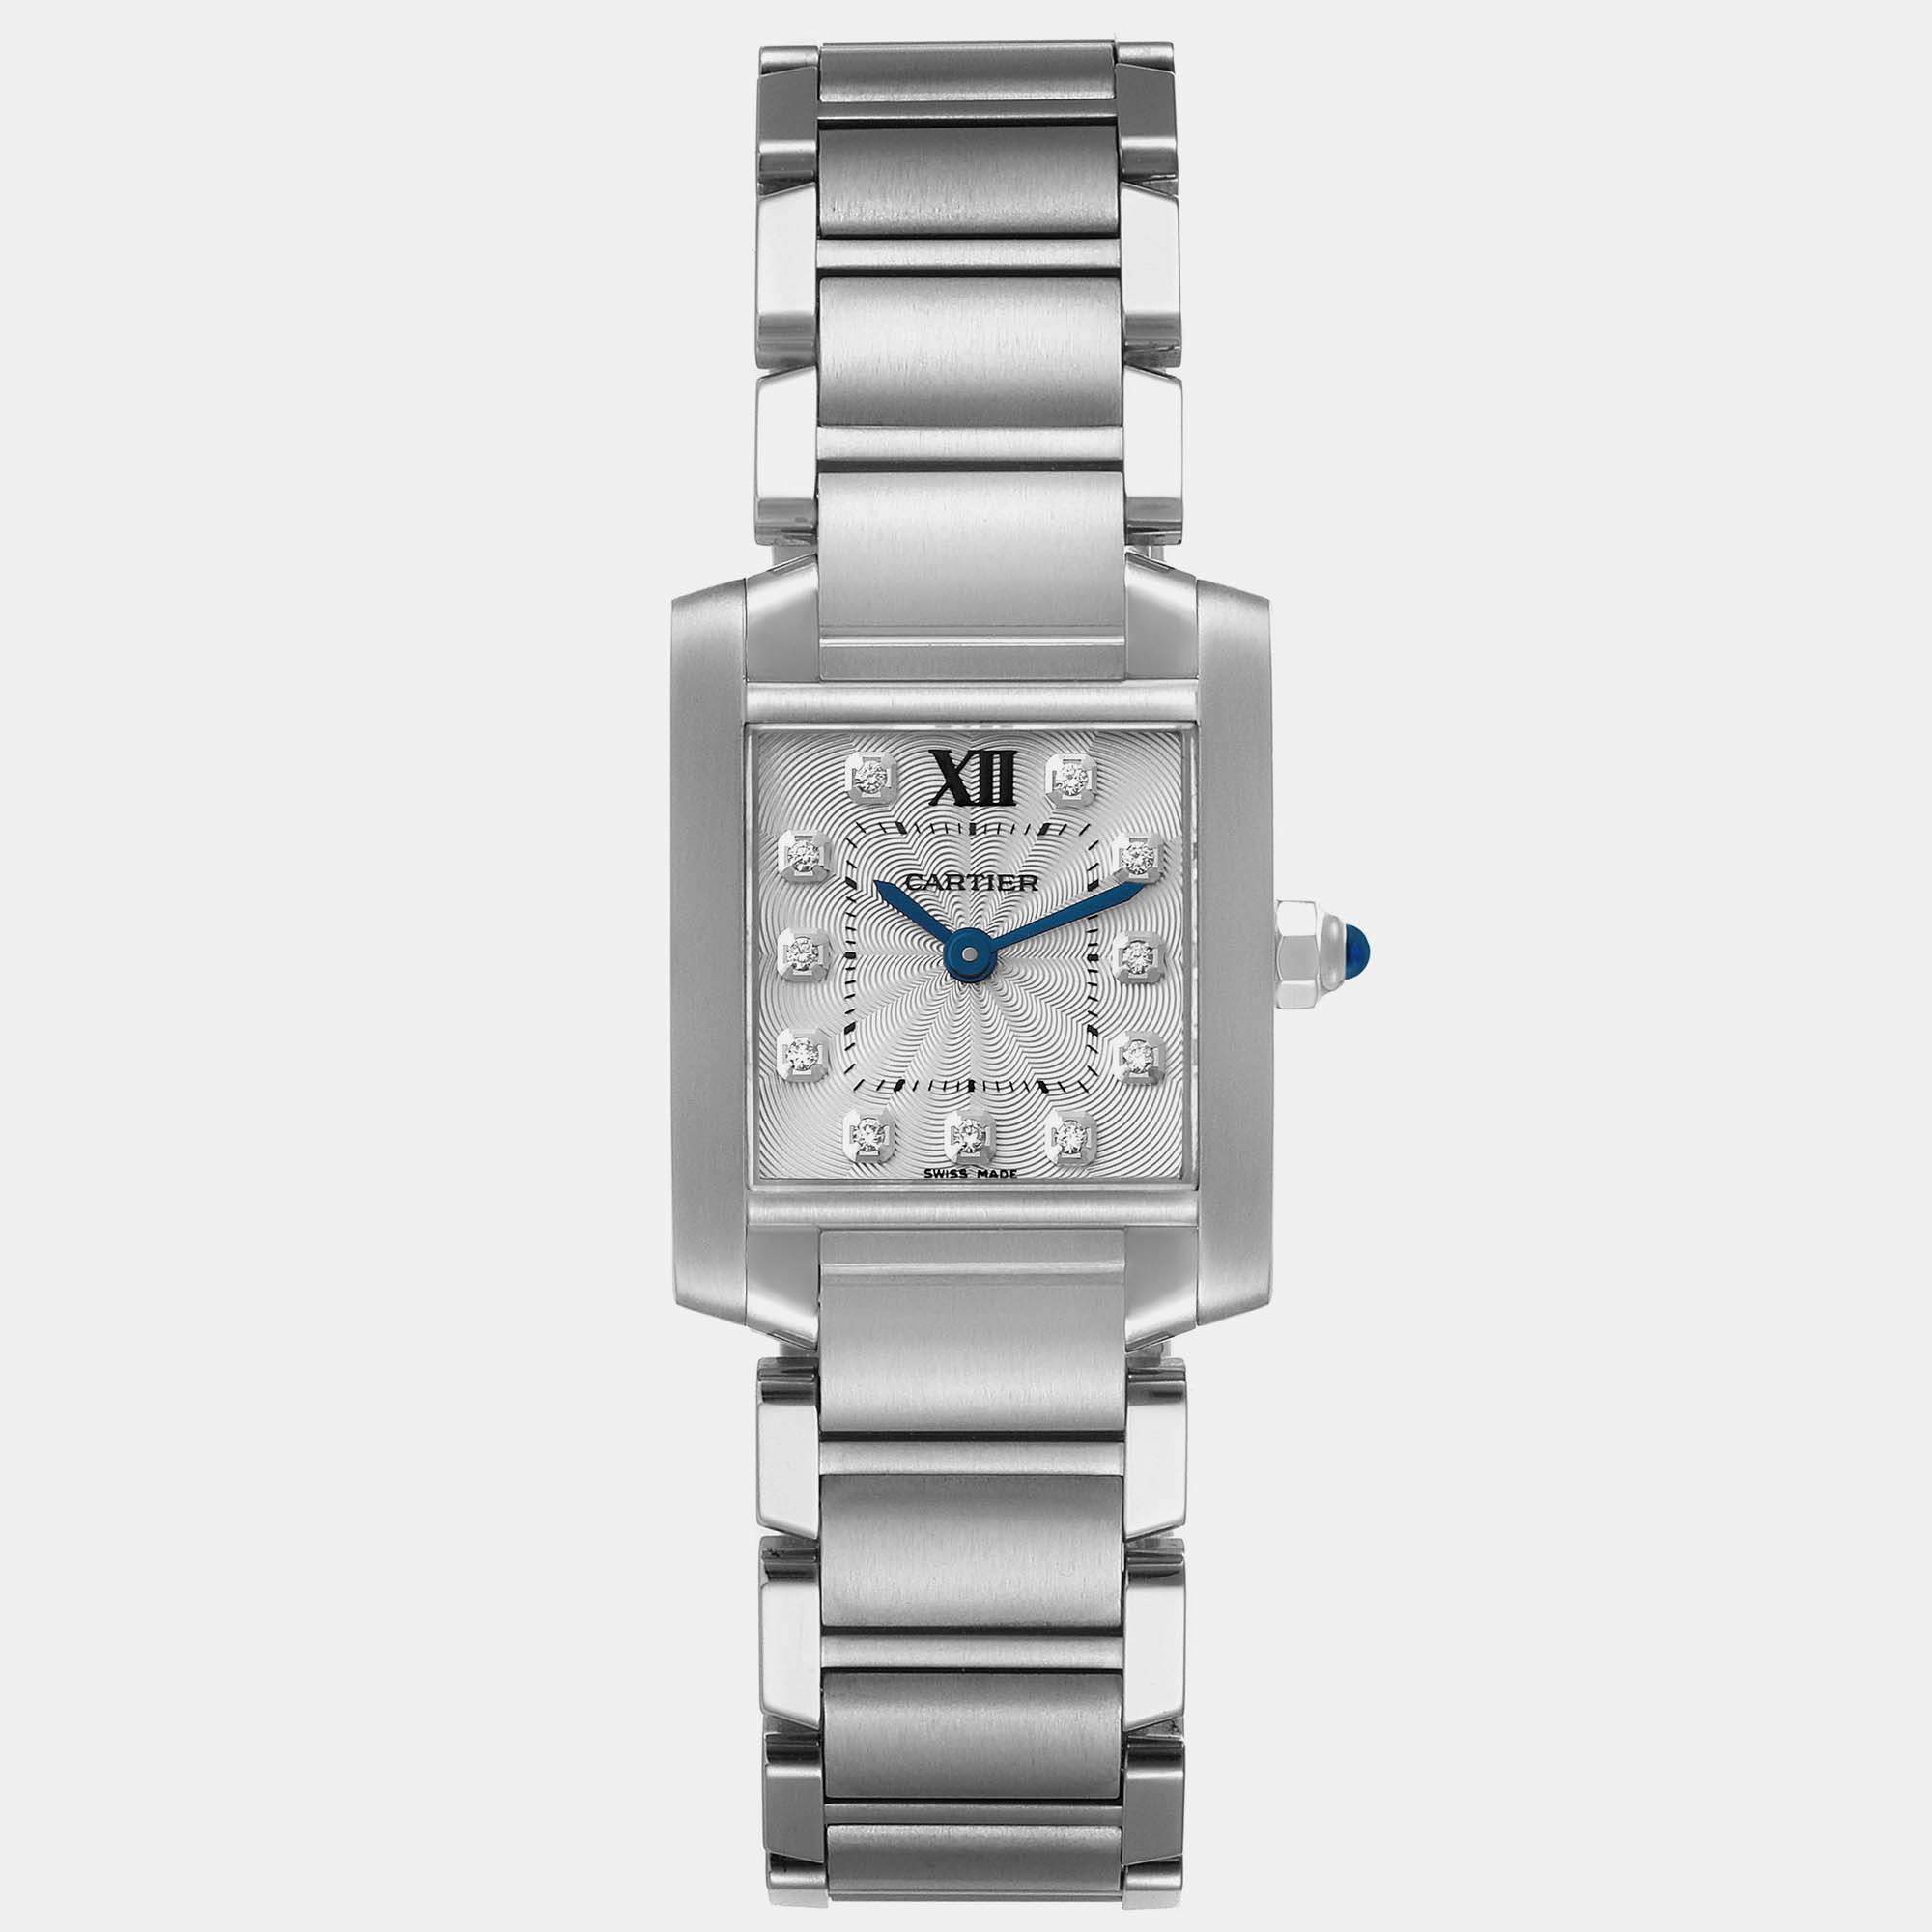 Cartier Tank Francaise Small Steel Diamond Dial Ladies Watch WE110006 20 x 25 mm